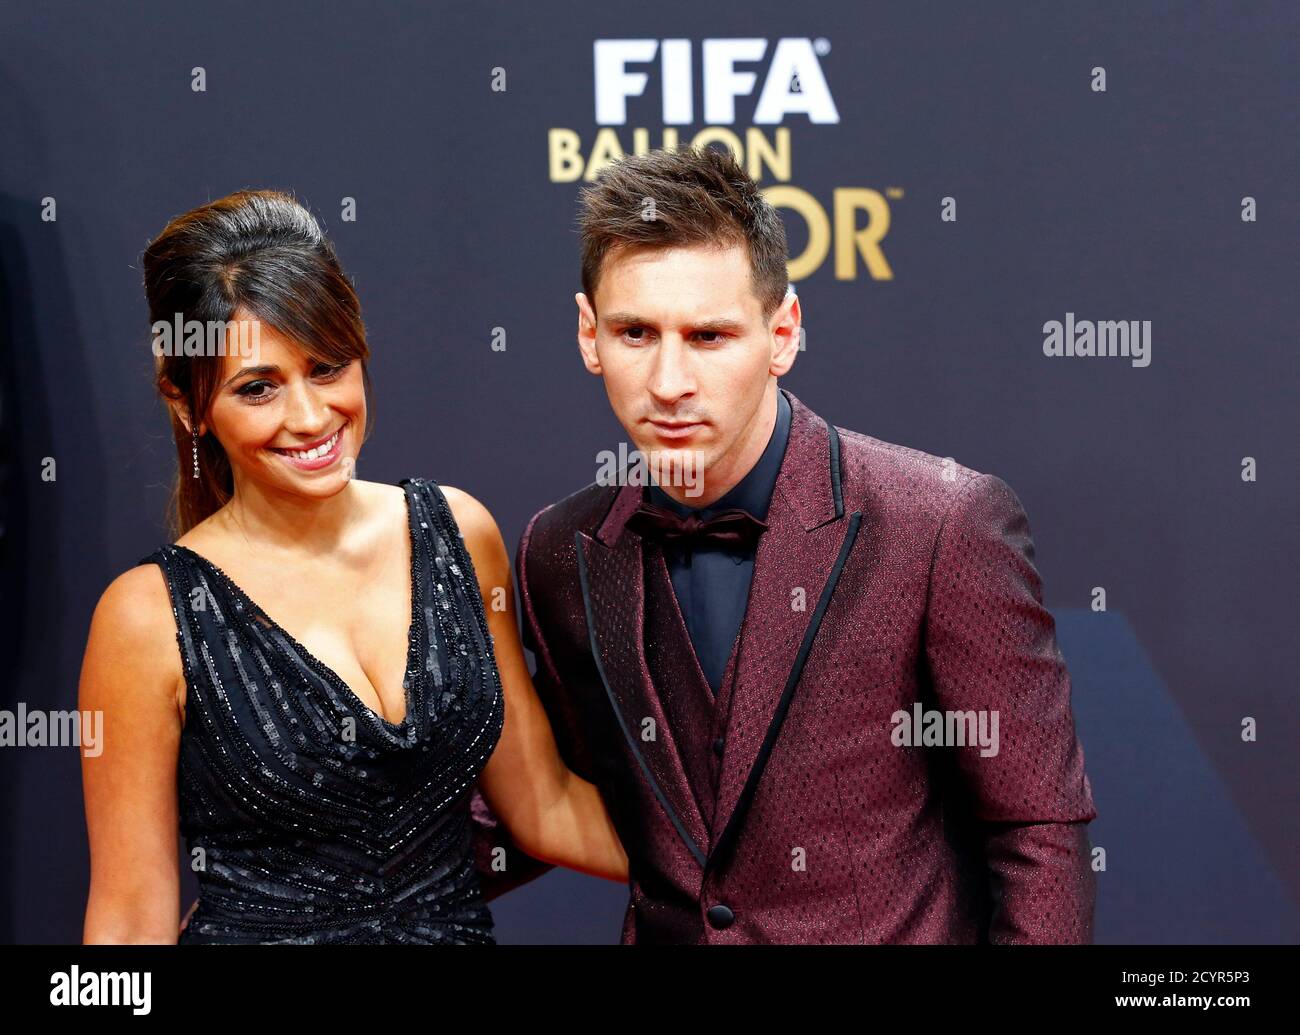 Barcelona's Lionel Messi of Argentina, a nominee for the 2014 FIFA World  Player of the Year, arrives with partner Antonella Roccuzzo for the FIFA Ballon  d'Or 2014 soccer awards ceremony at the